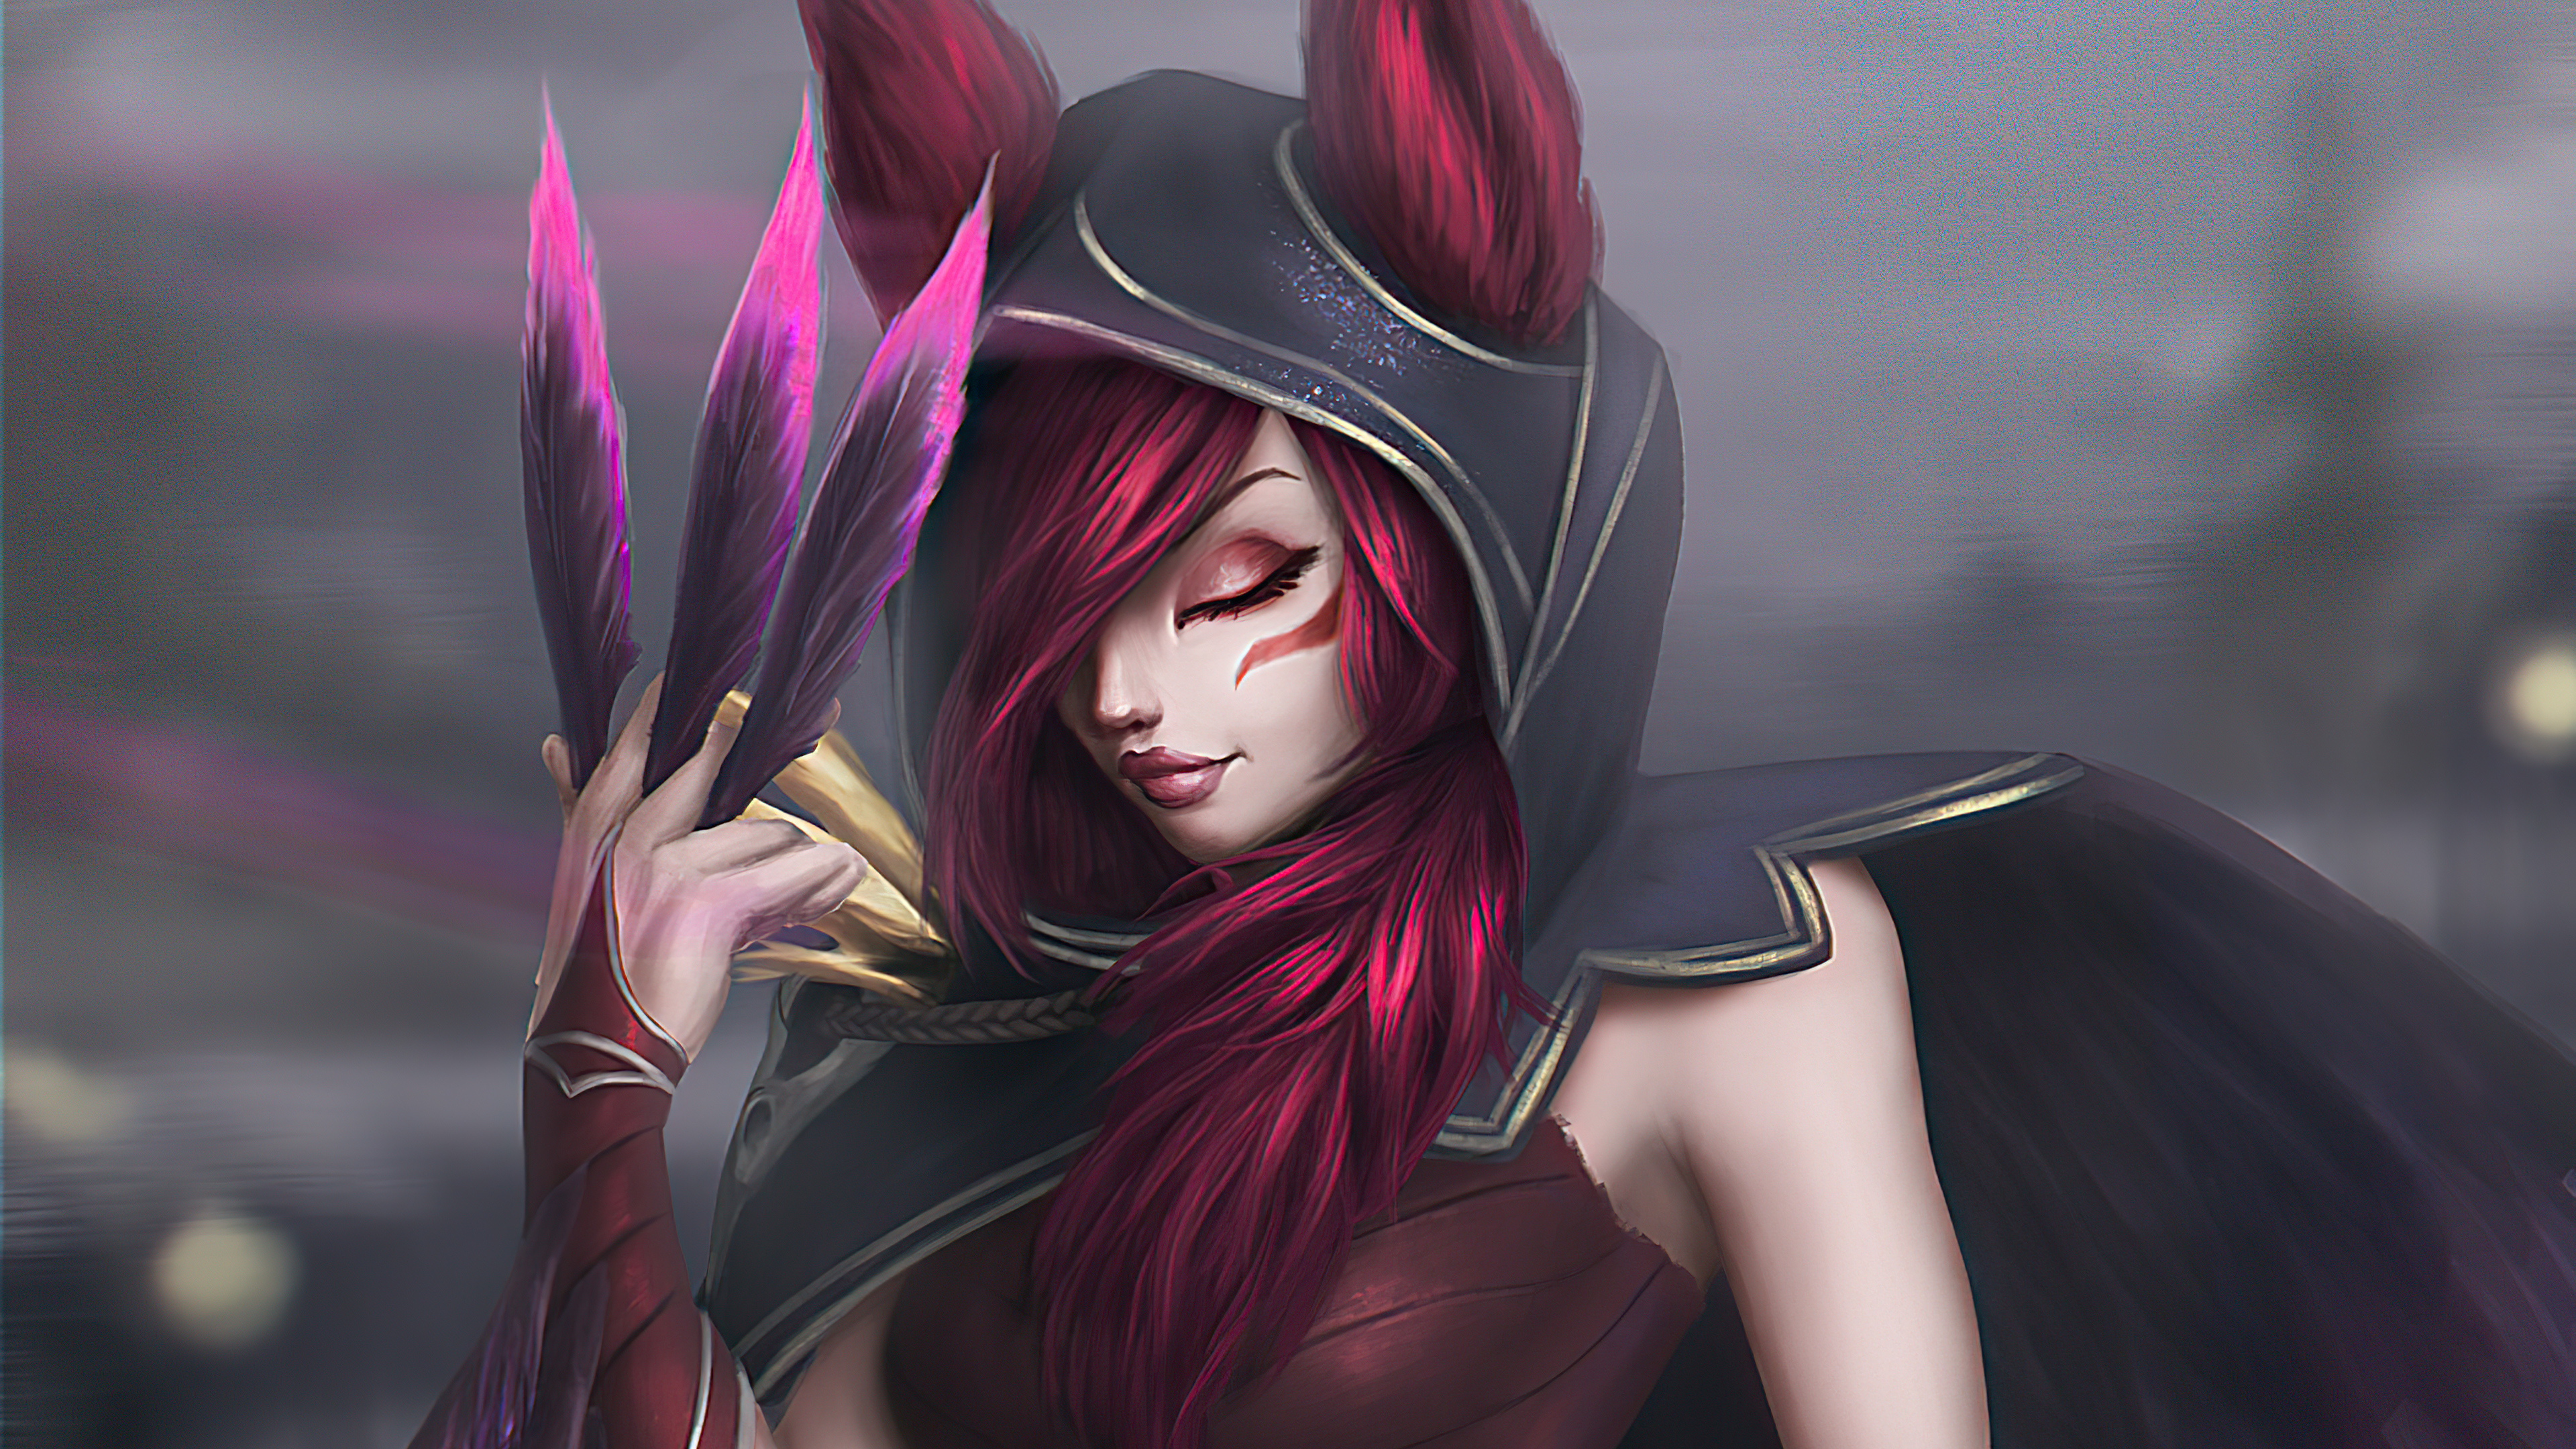 40 Xayah (League of Legends) HD Wallpapers and Backgrounds. wall.alphacoder...